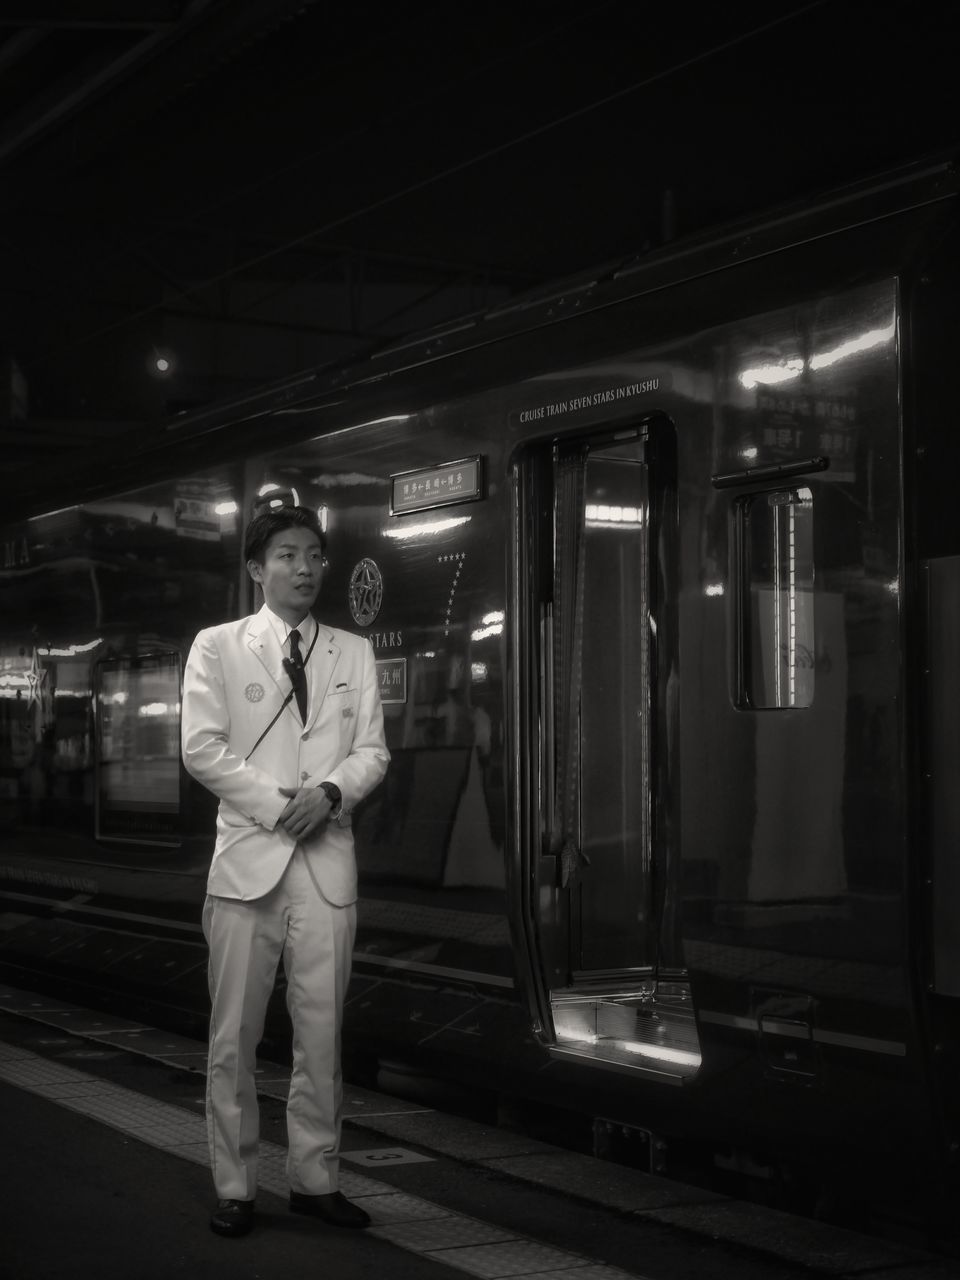 men, lifestyles, rear view, full length, illuminated, night, standing, person, public transportation, indoors, casual clothing, walking, railroad station platform, leisure activity, transportation, railroad station, rail transportation